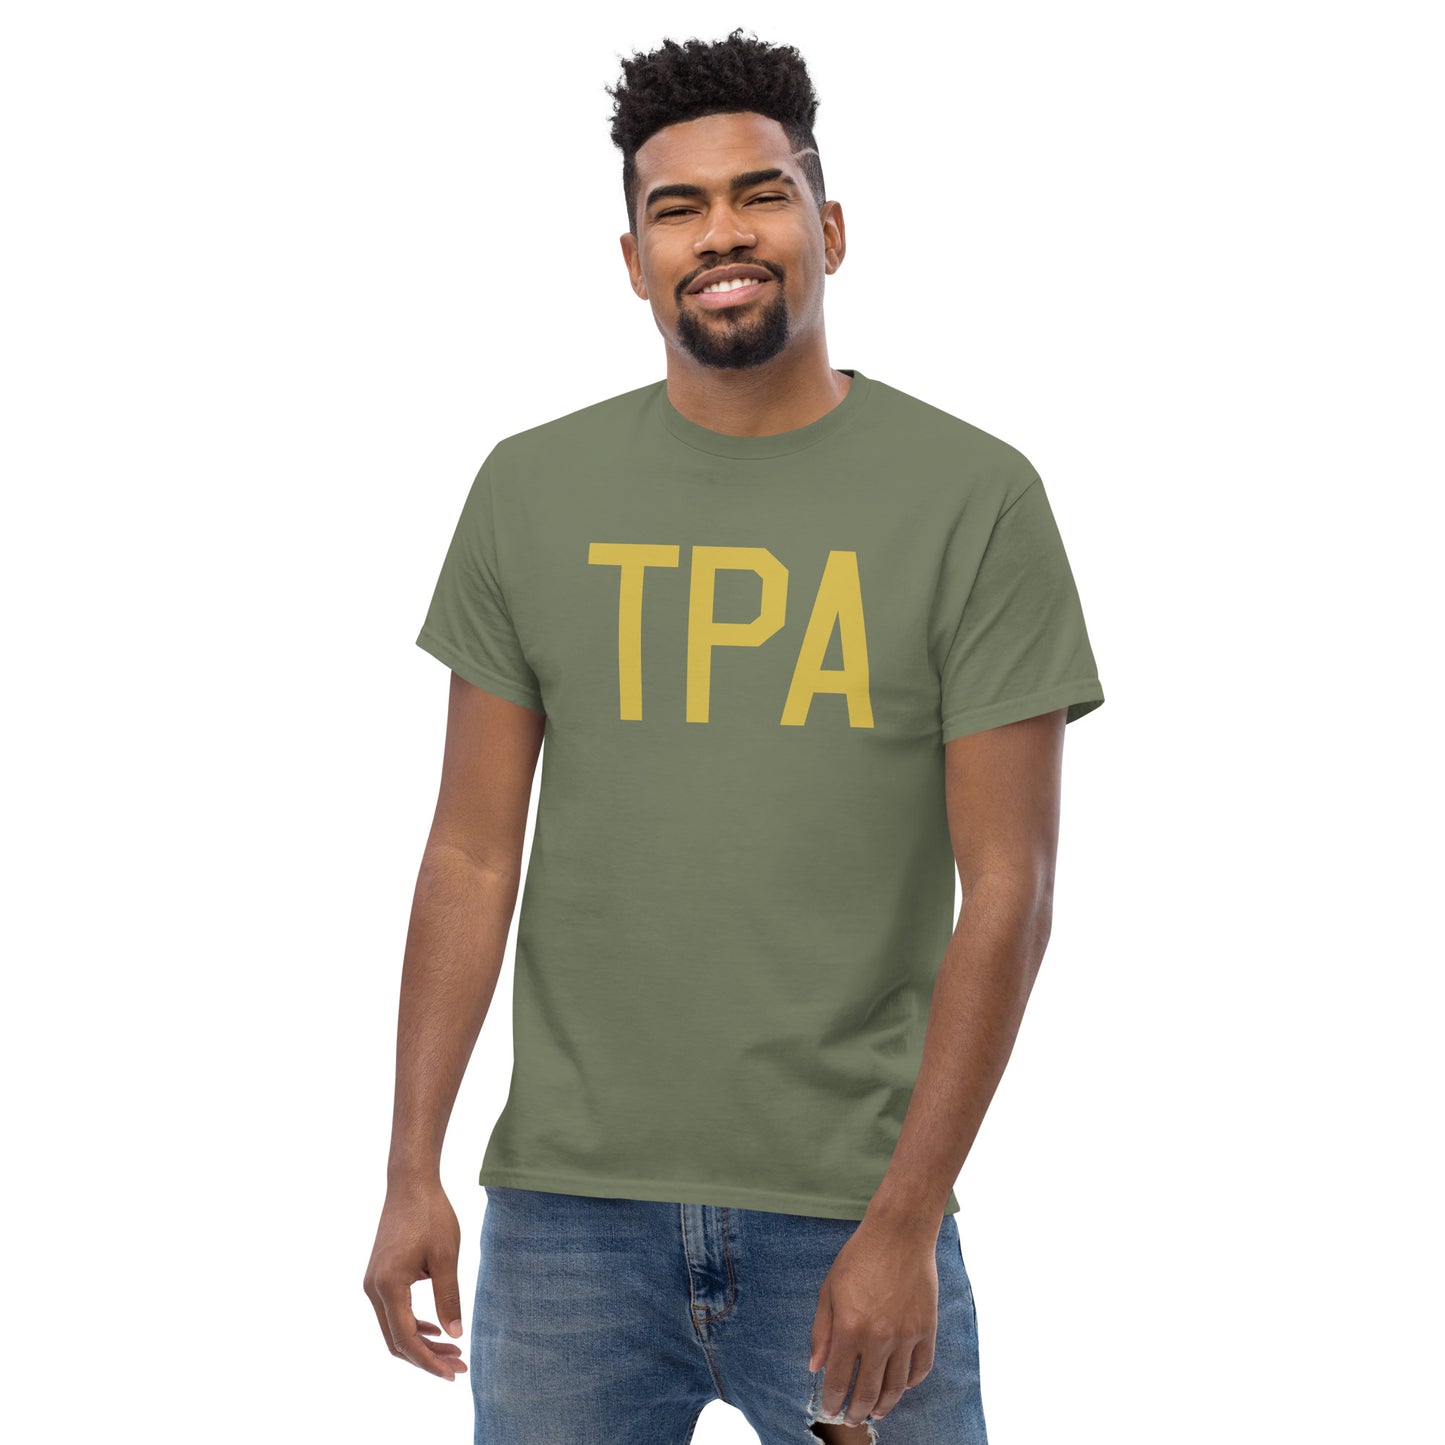 Aviation Enthusiast Men's Tee - Old Gold Graphic • TPA Tampa • YHM Designs - Image 06